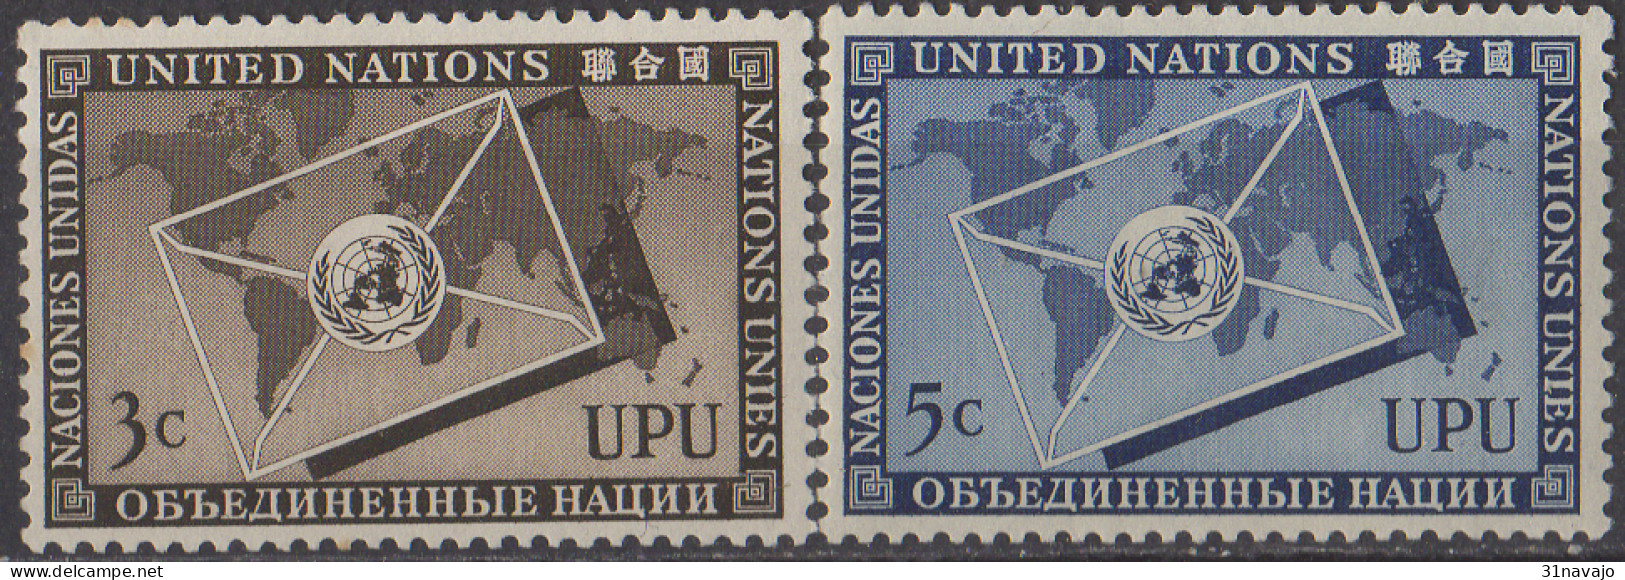 NATIONS UNIES (New York) - Union Postale Universelle - Unused Stamps